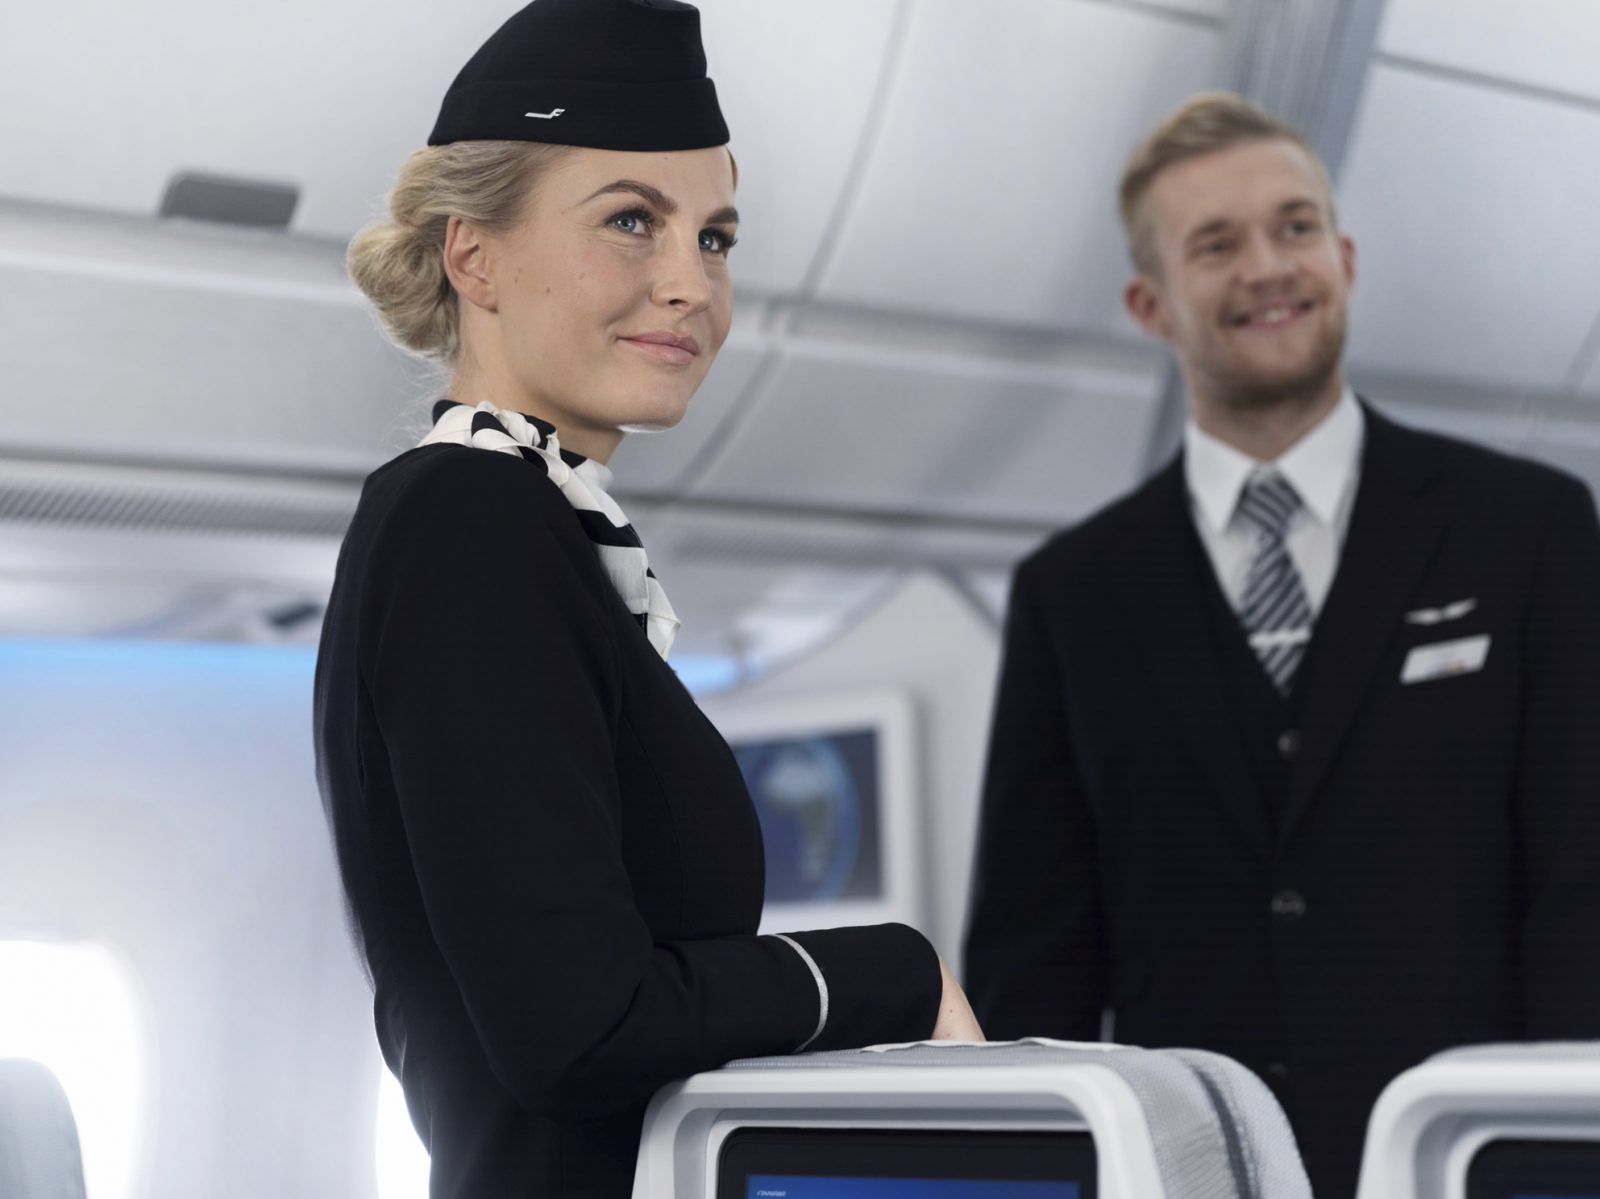 Should Tipping Flight Attendants Be the Norm? We Asked Airline